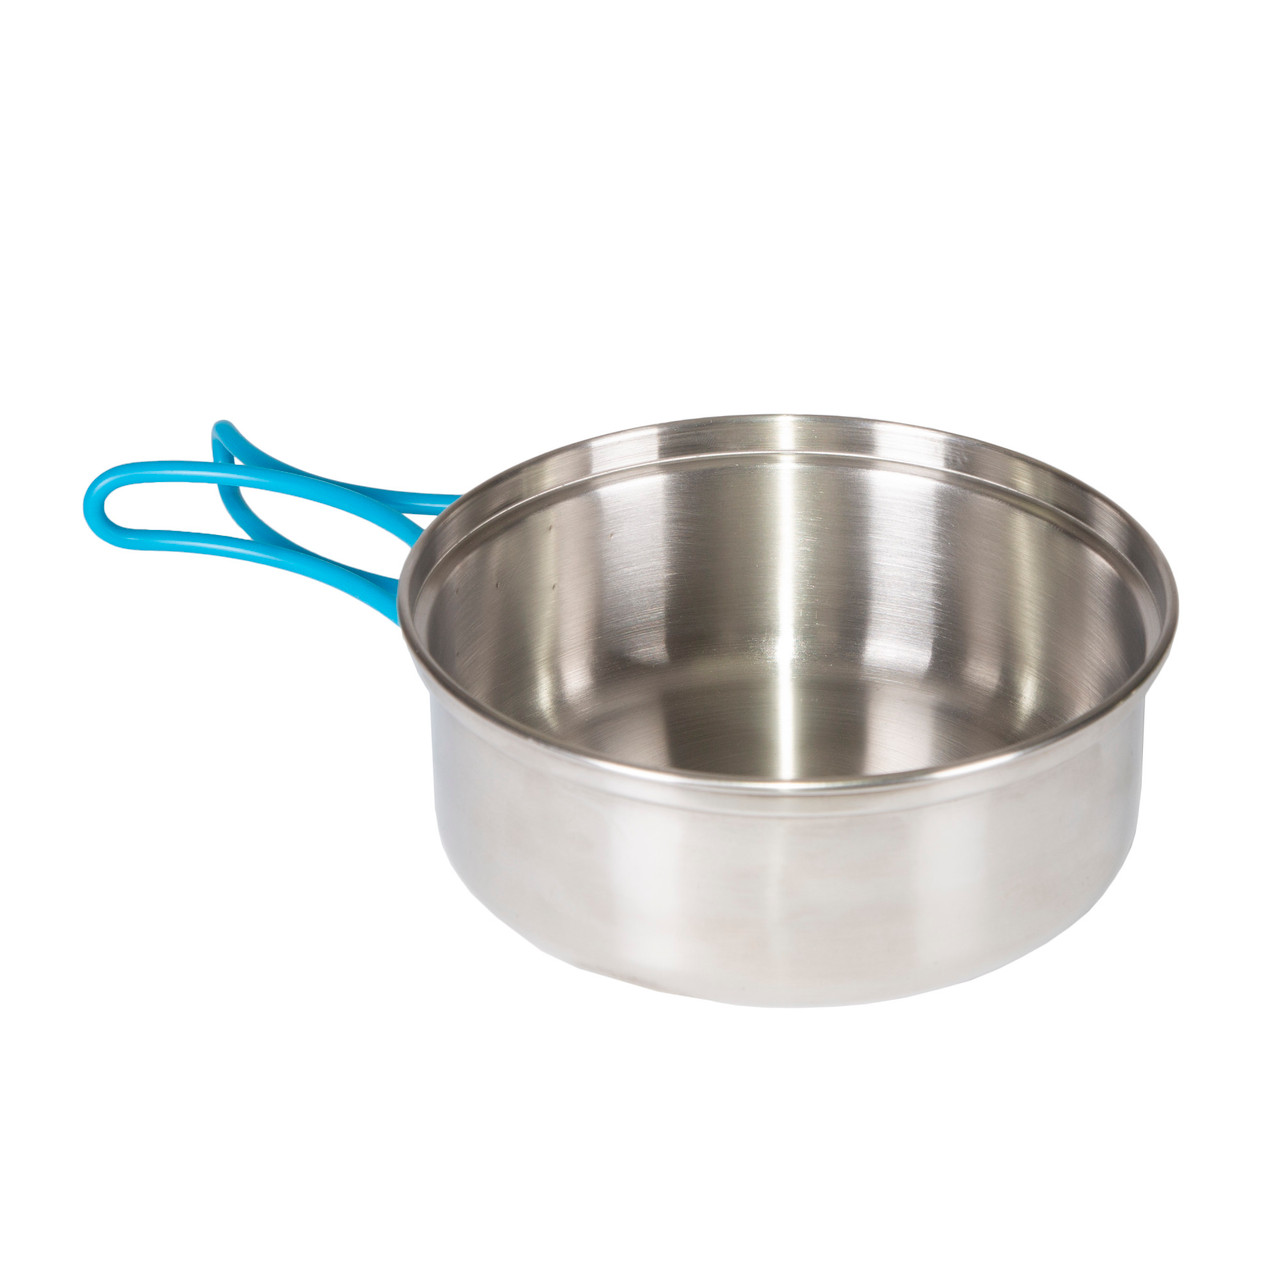 Stansport Solo II Stainless Steel Cook Pot 1 Liter